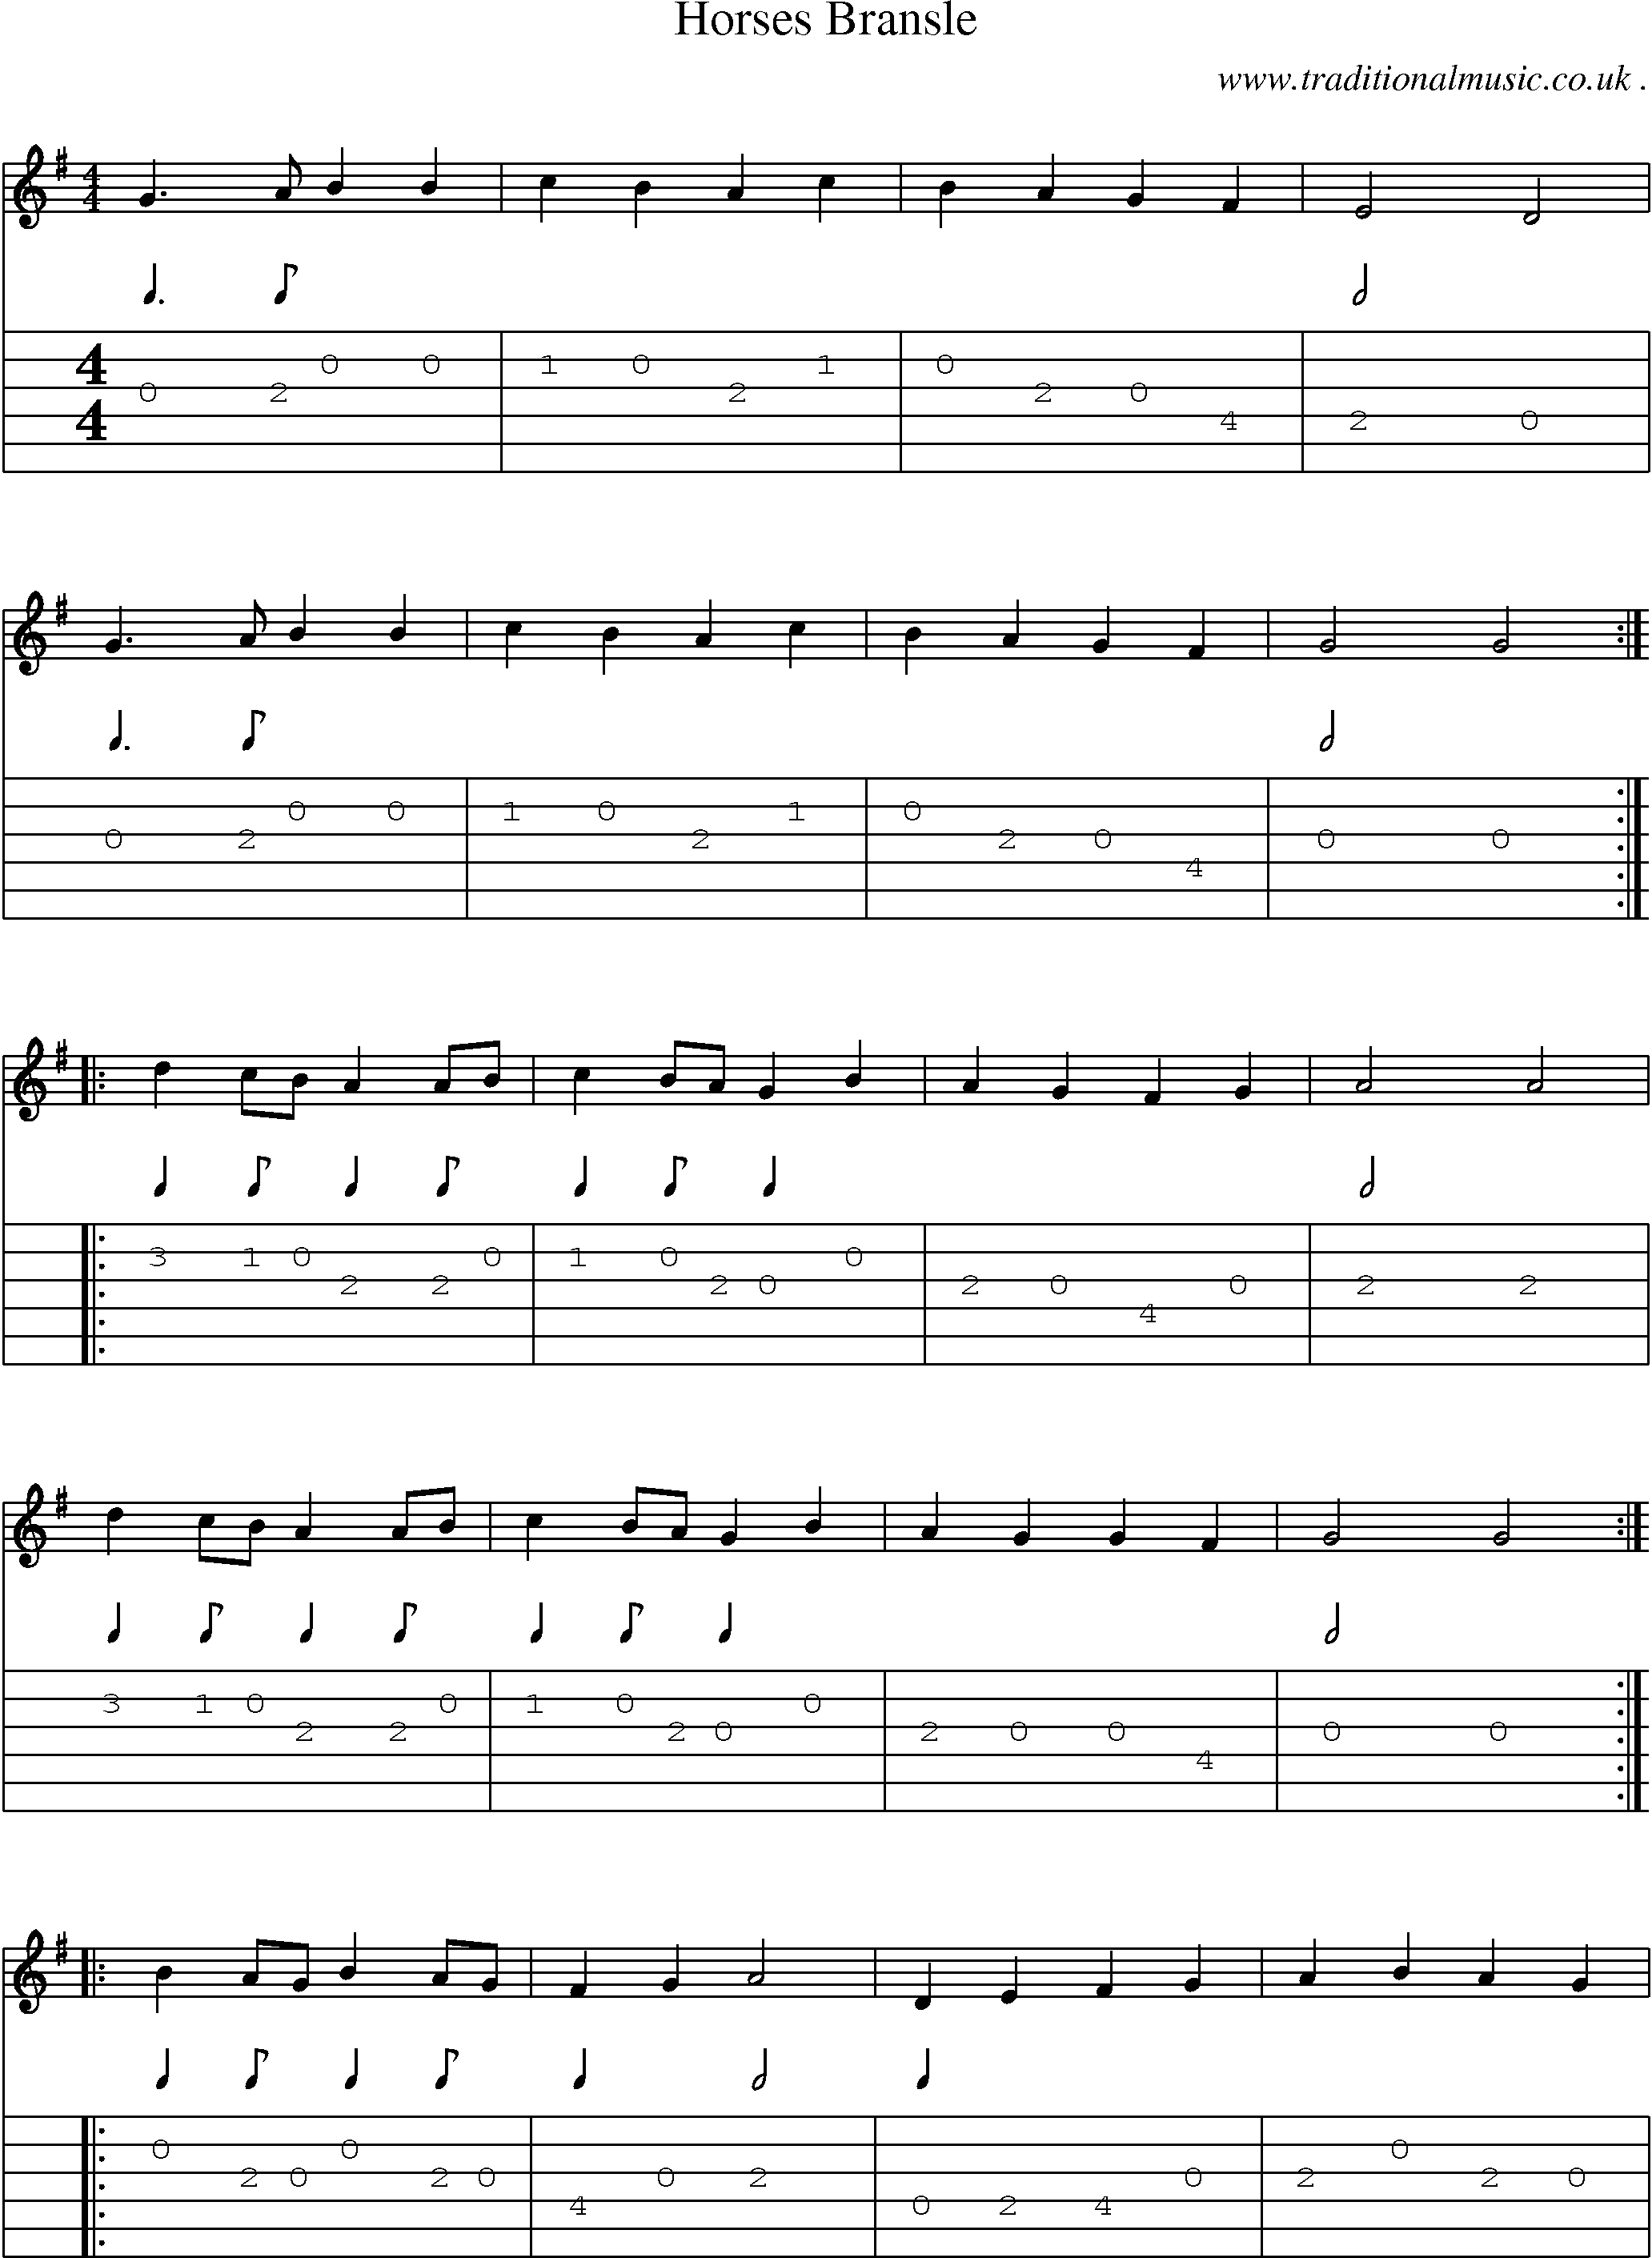 Sheet-Music and Guitar Tabs for Horses Bransle